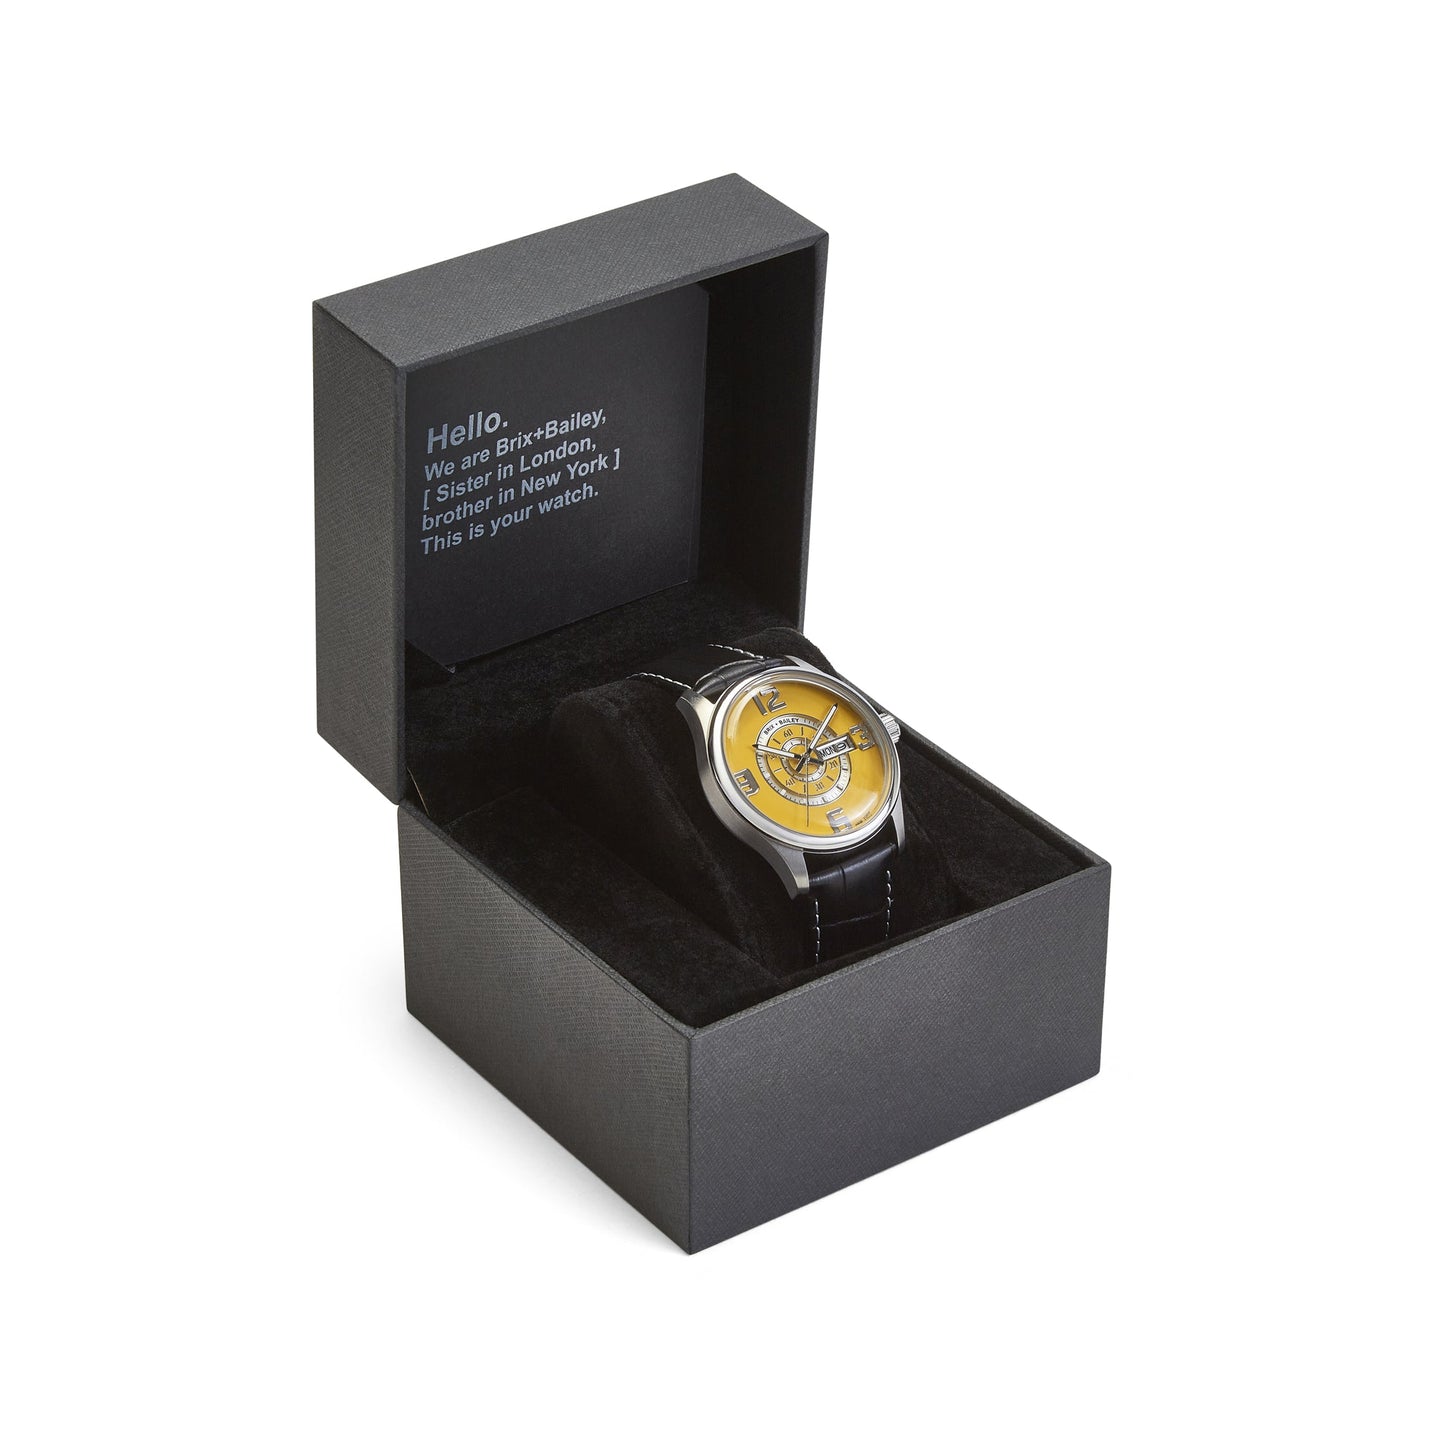 Brix+Bailey Simmonds Watch Yellow Mens Watch Brix and Bailey